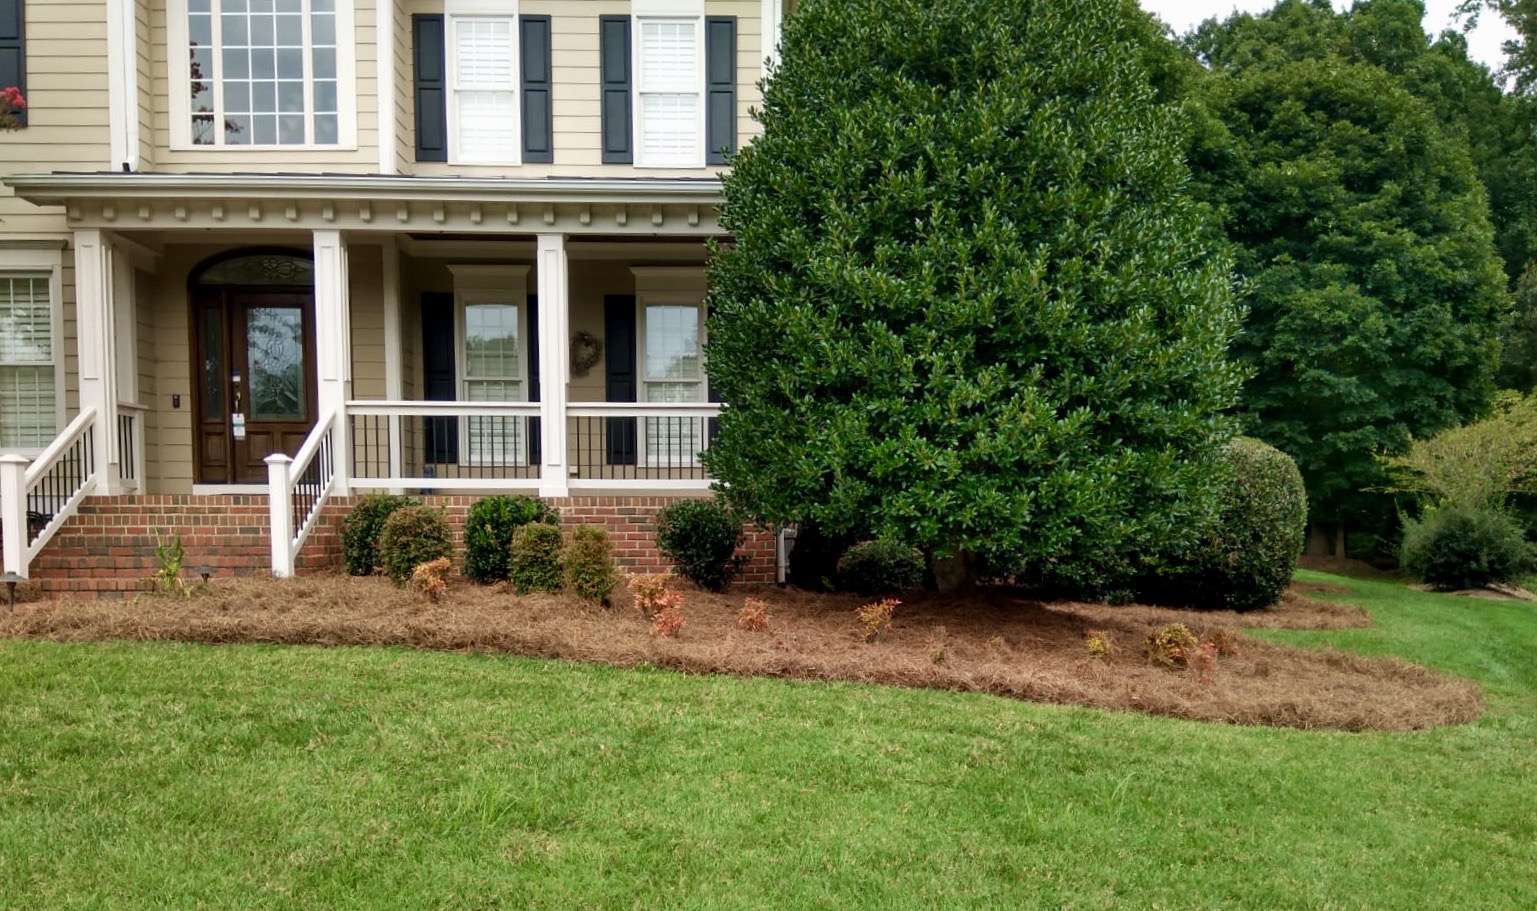 Agape Lawn Company Chapel Hill Lawn Improvement Landscaping Services Near Me